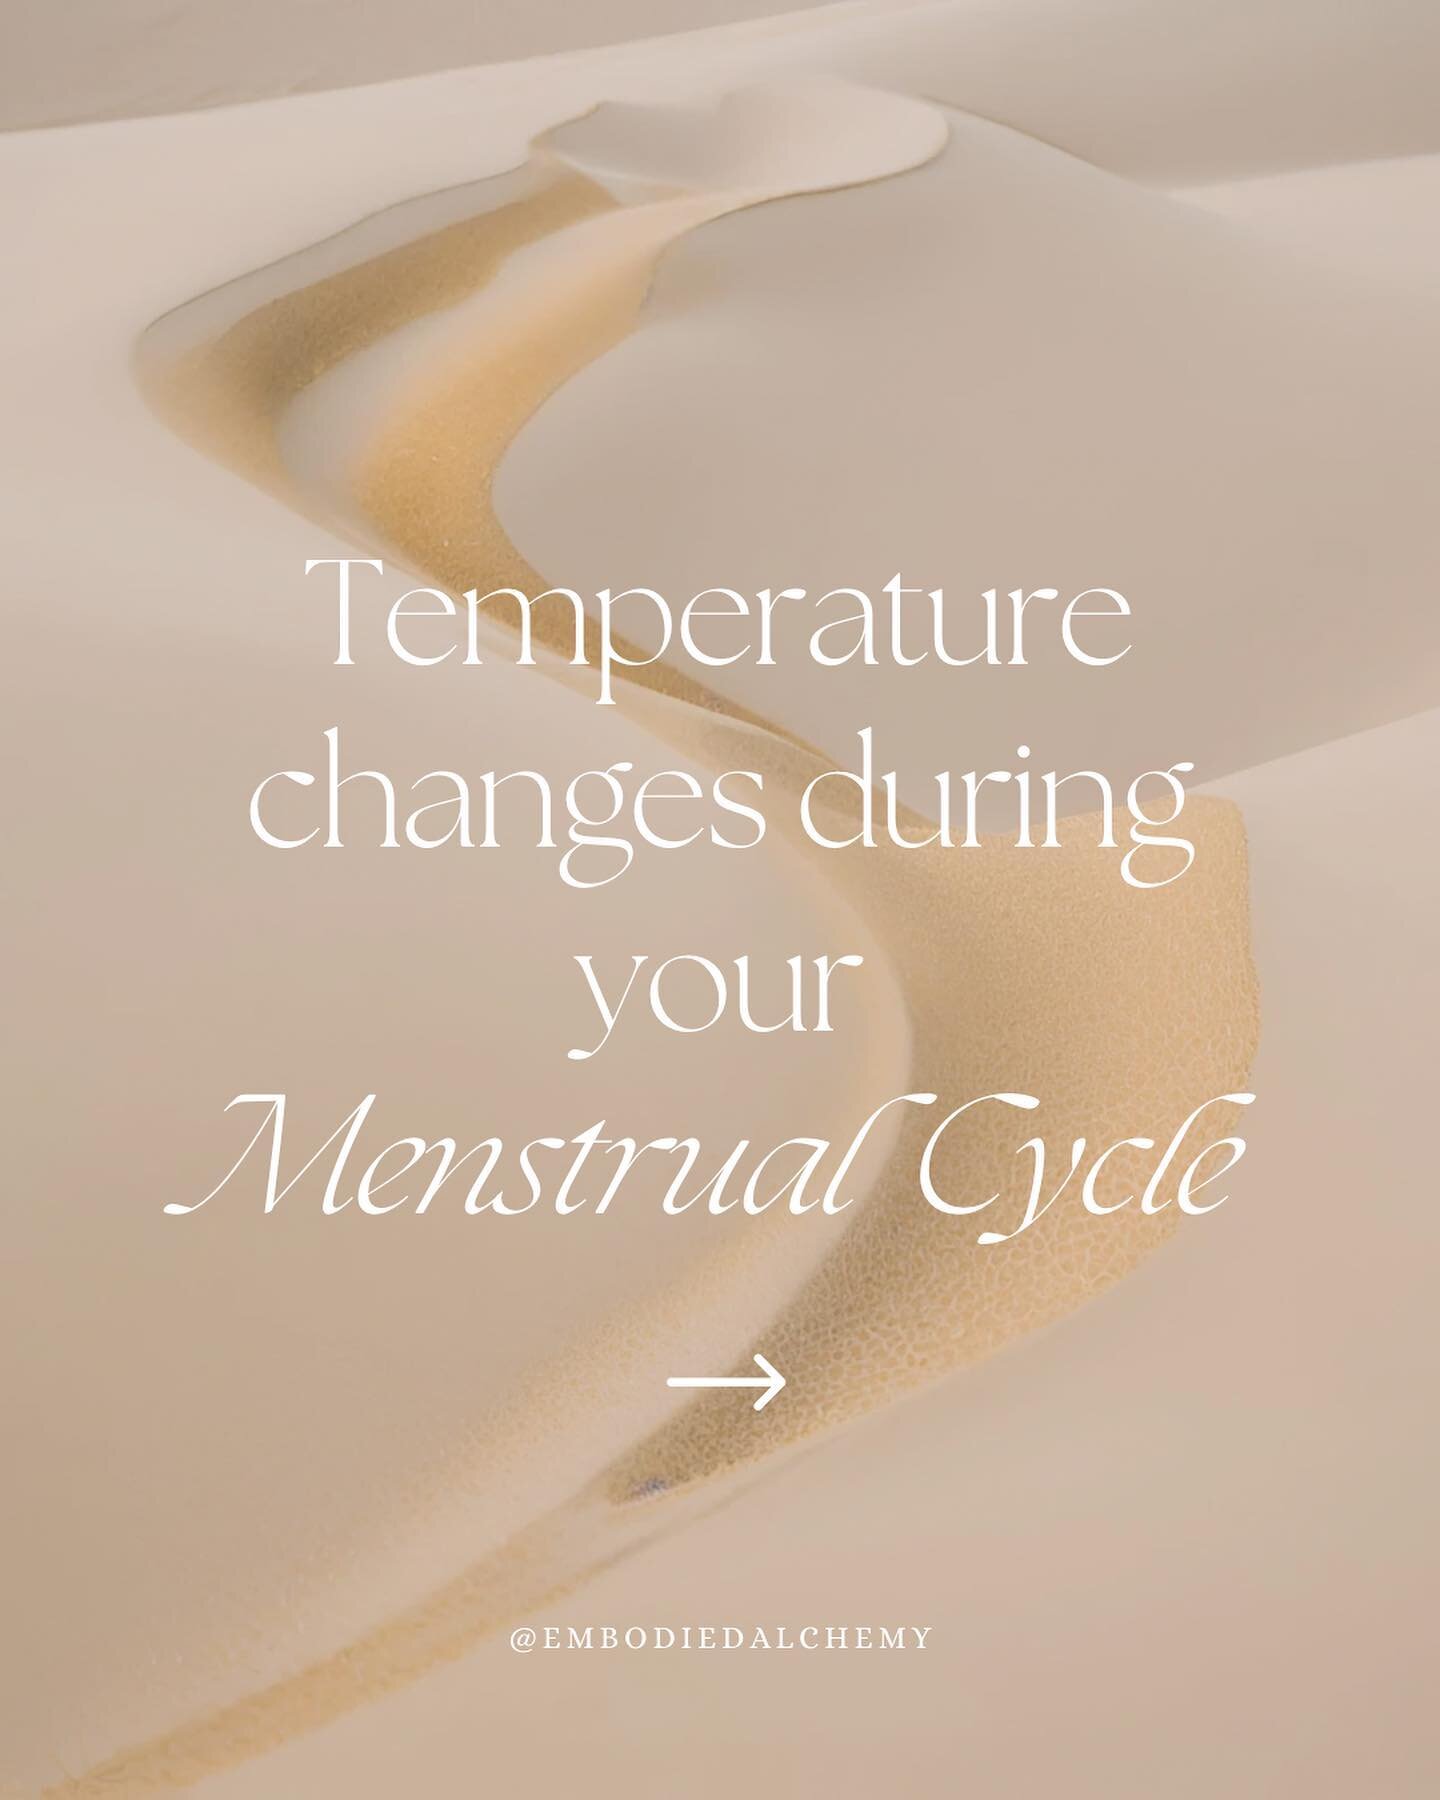 You Basal Body Temperature (BBT) - your lowest natural, non-pathologic body temperature recorded after a period of rest - changes during the course of your menstrual cycle. Measuring your BBT can be beneficial to determine ovulation (if you&rsquo;re 